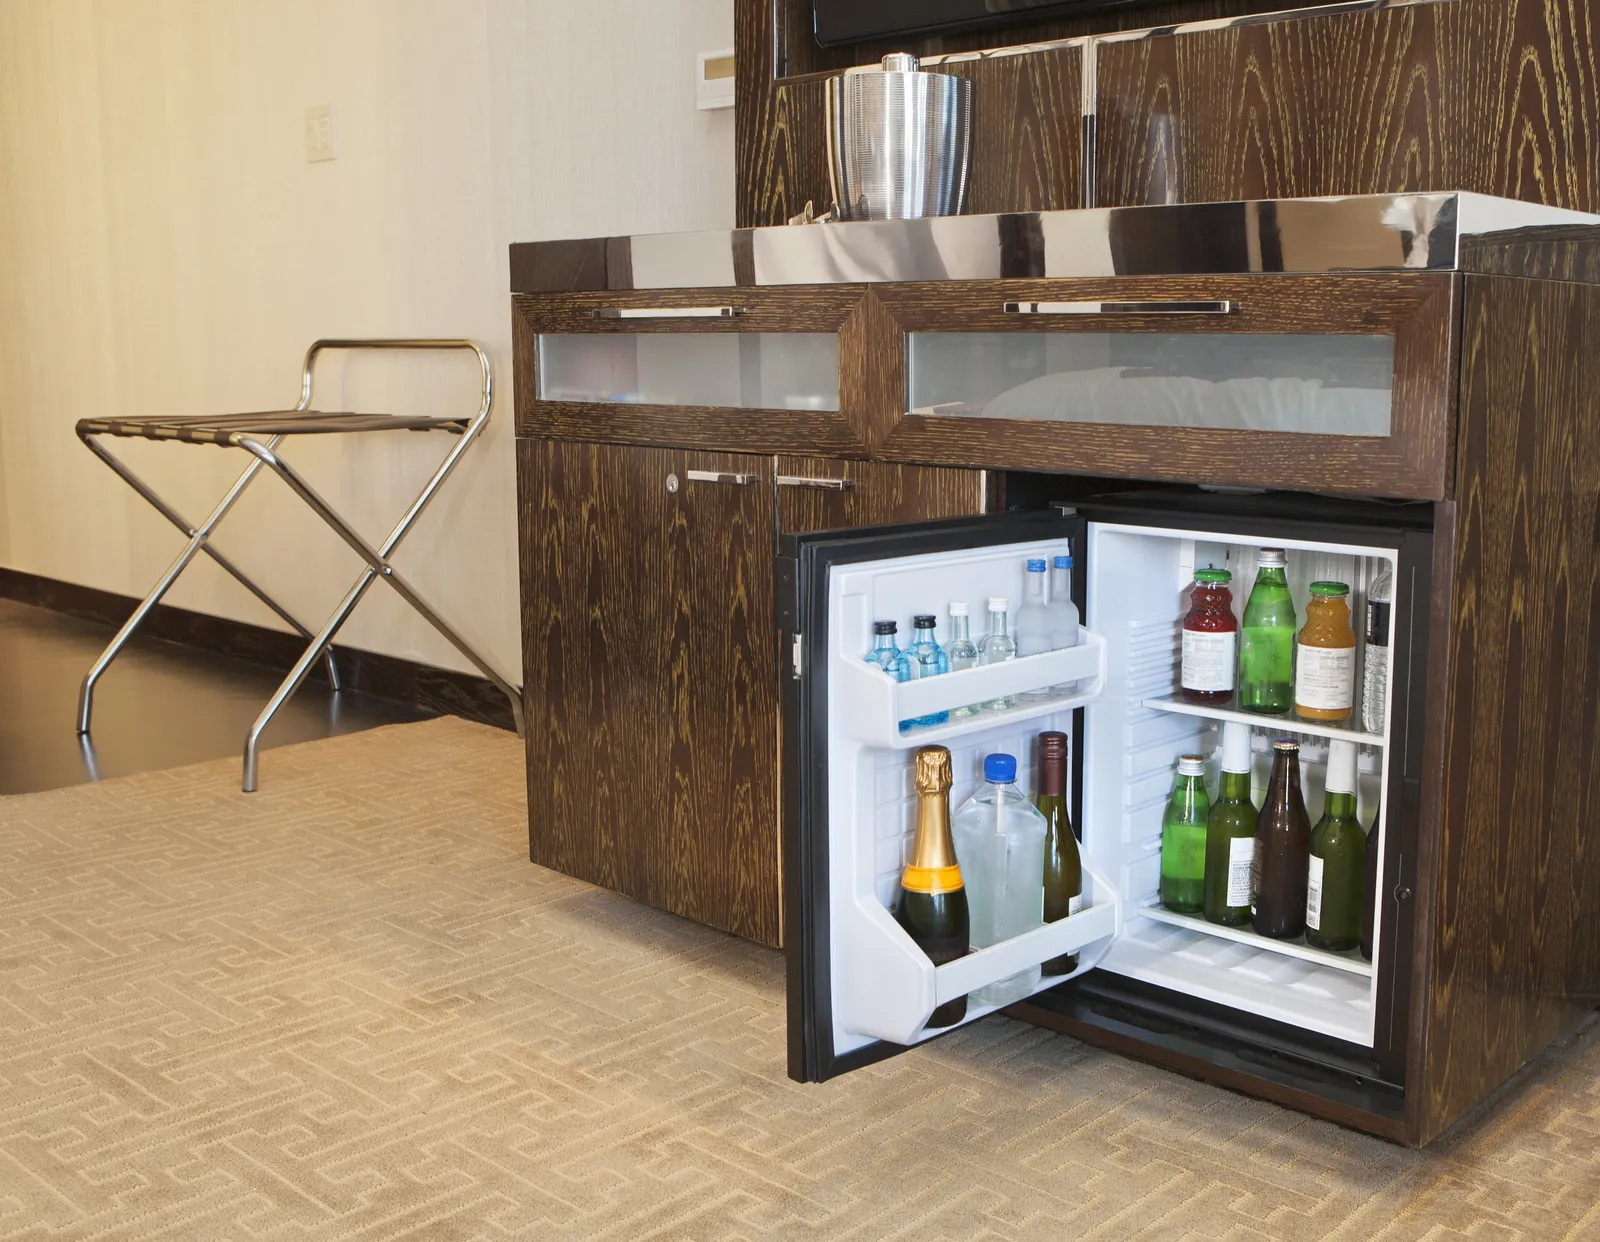 Hotel Minibars Try to Make a Comeback With Better Design and Local